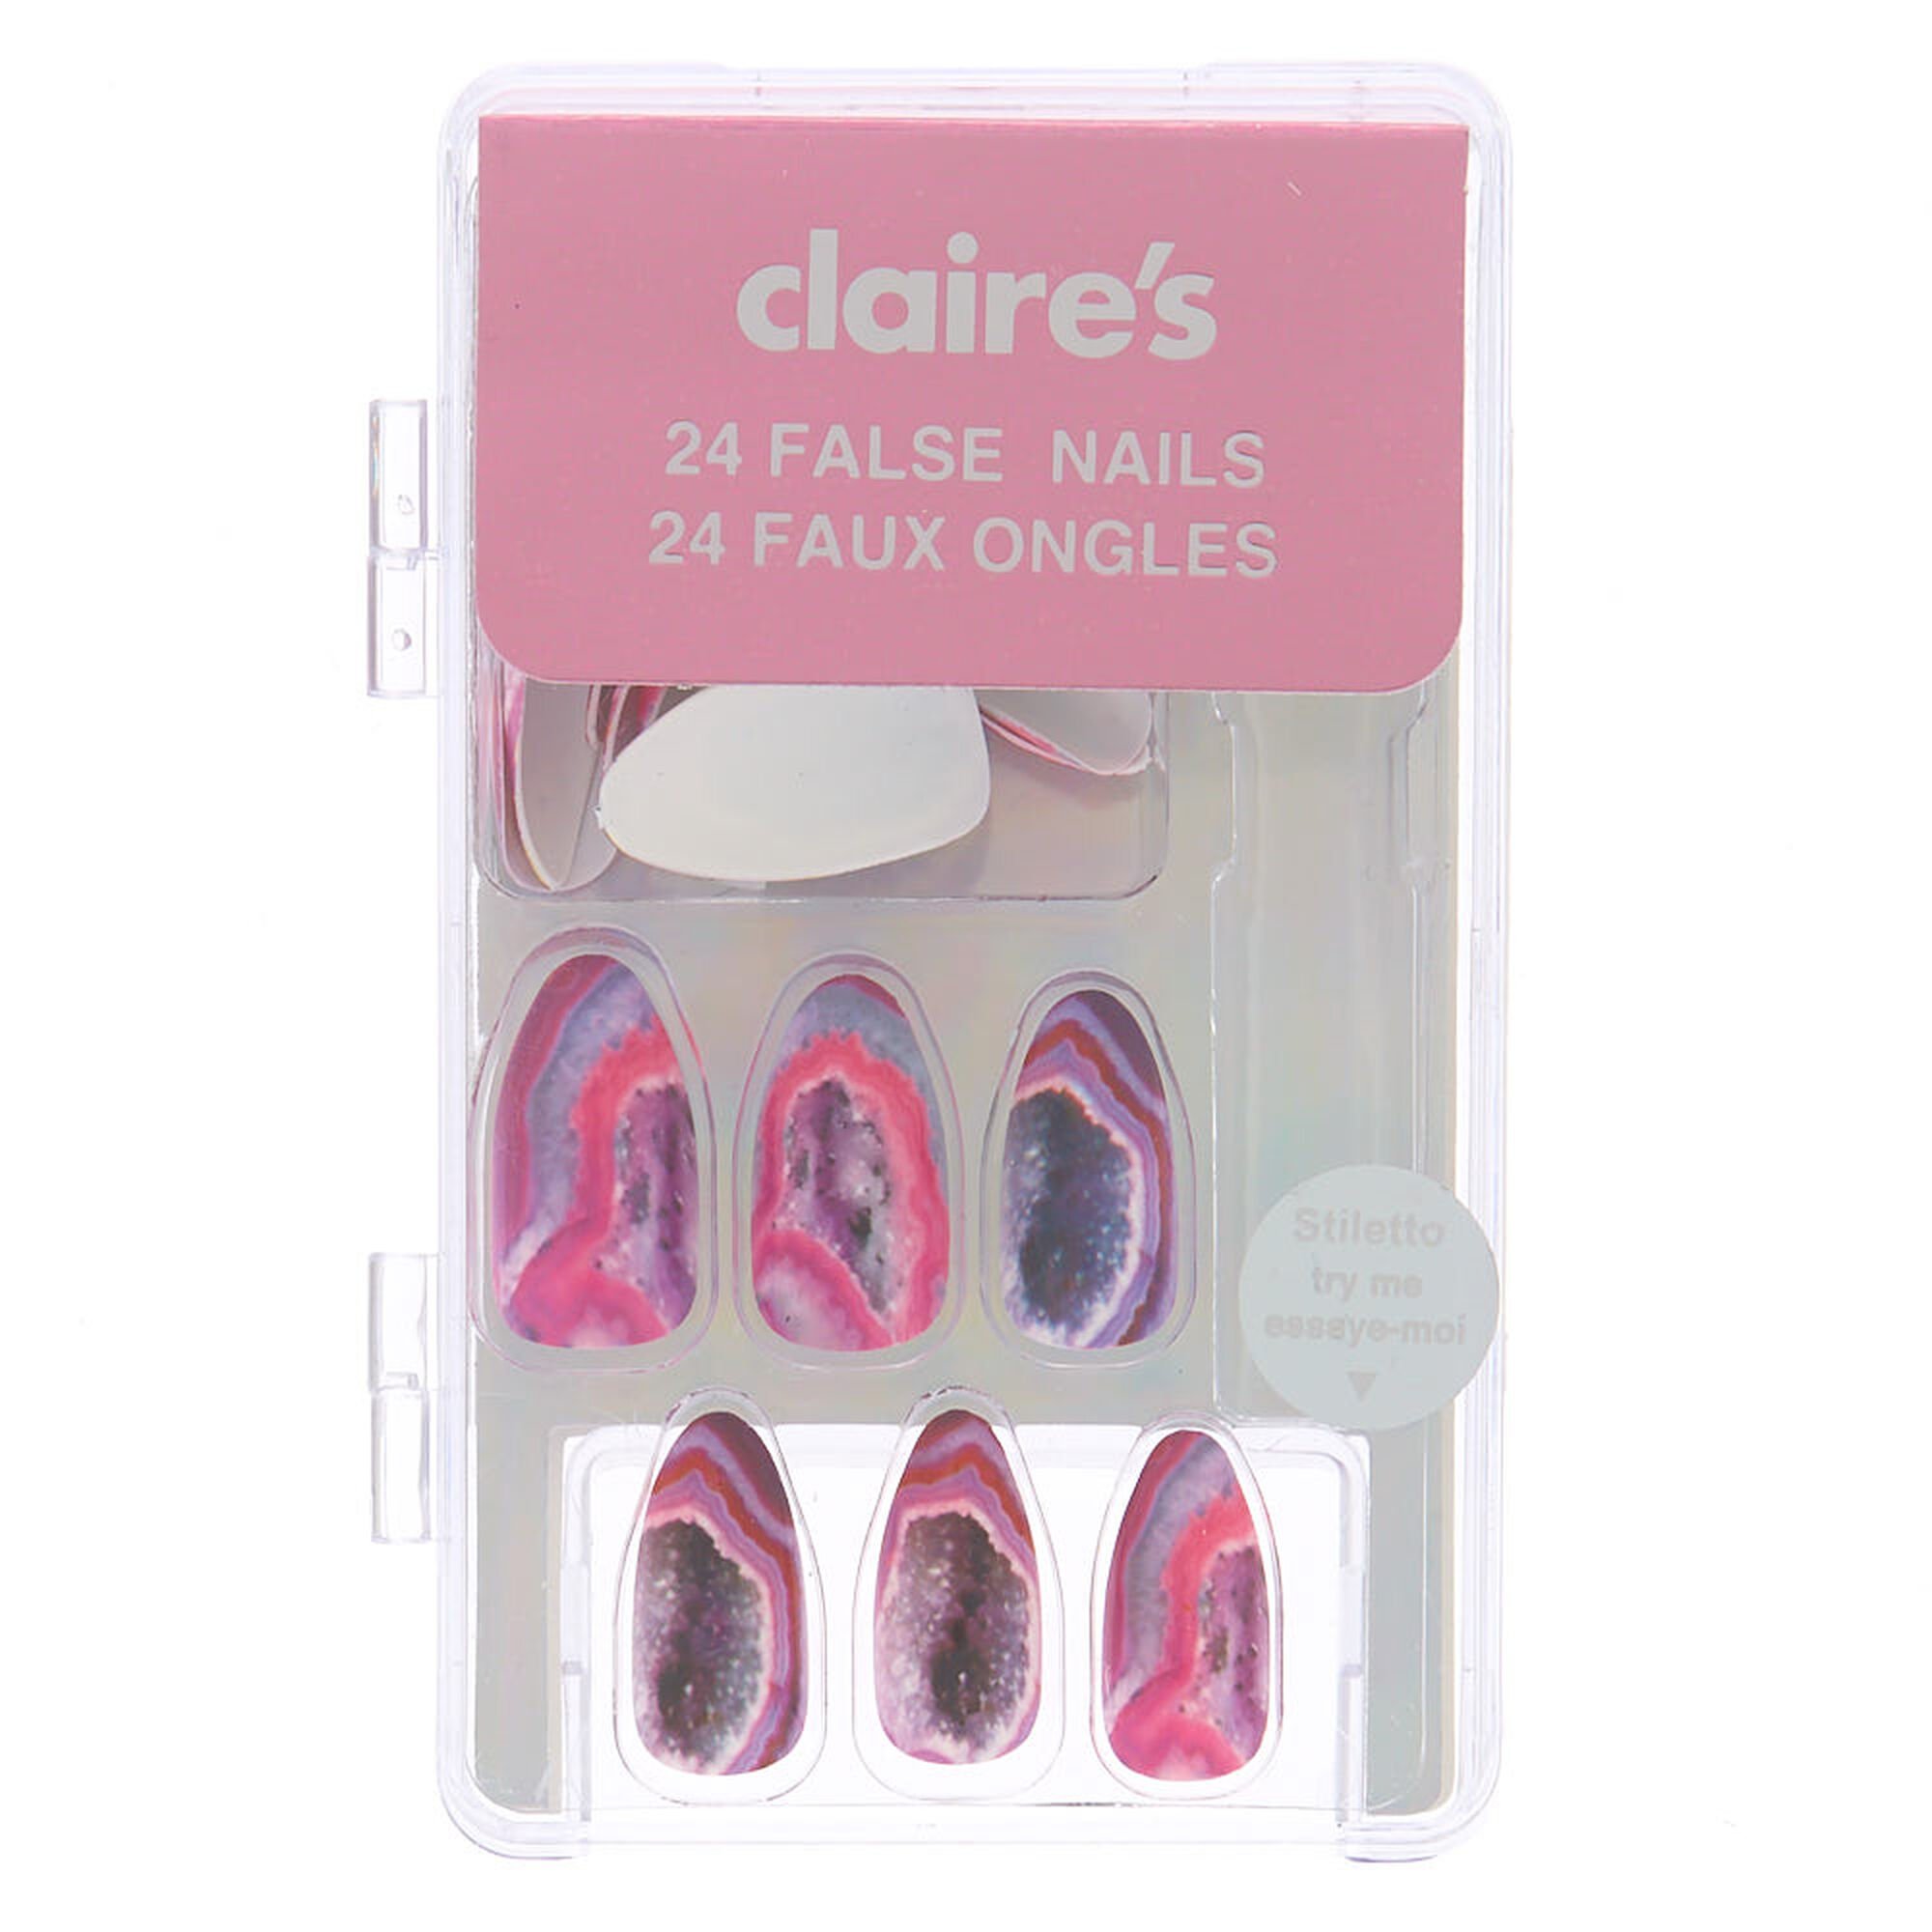 Geode False Nails - Pink, 24 Pack | Claire's US